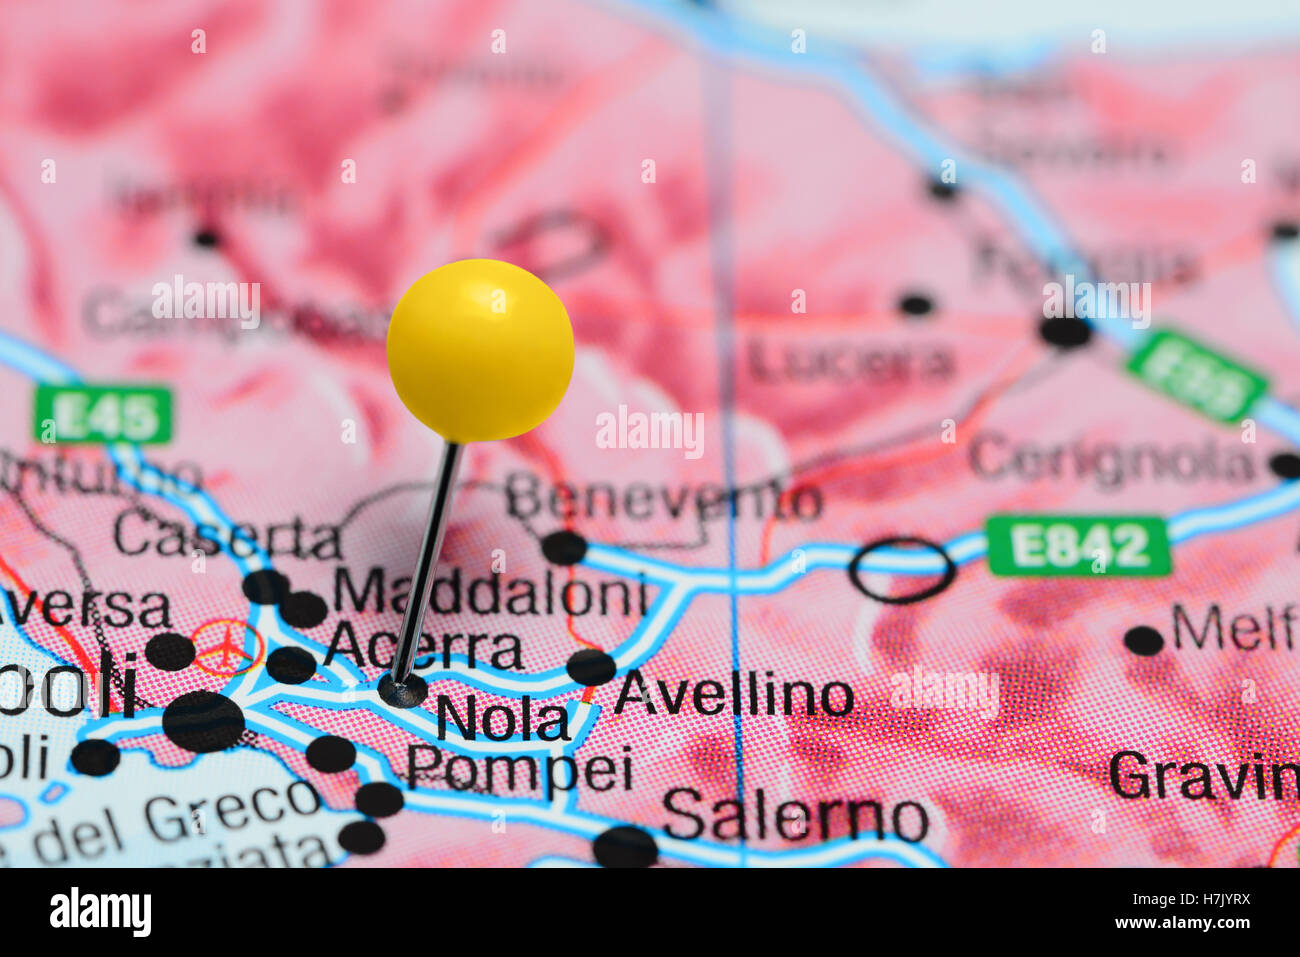 Nola pinned on a map of Italy Stock Photo